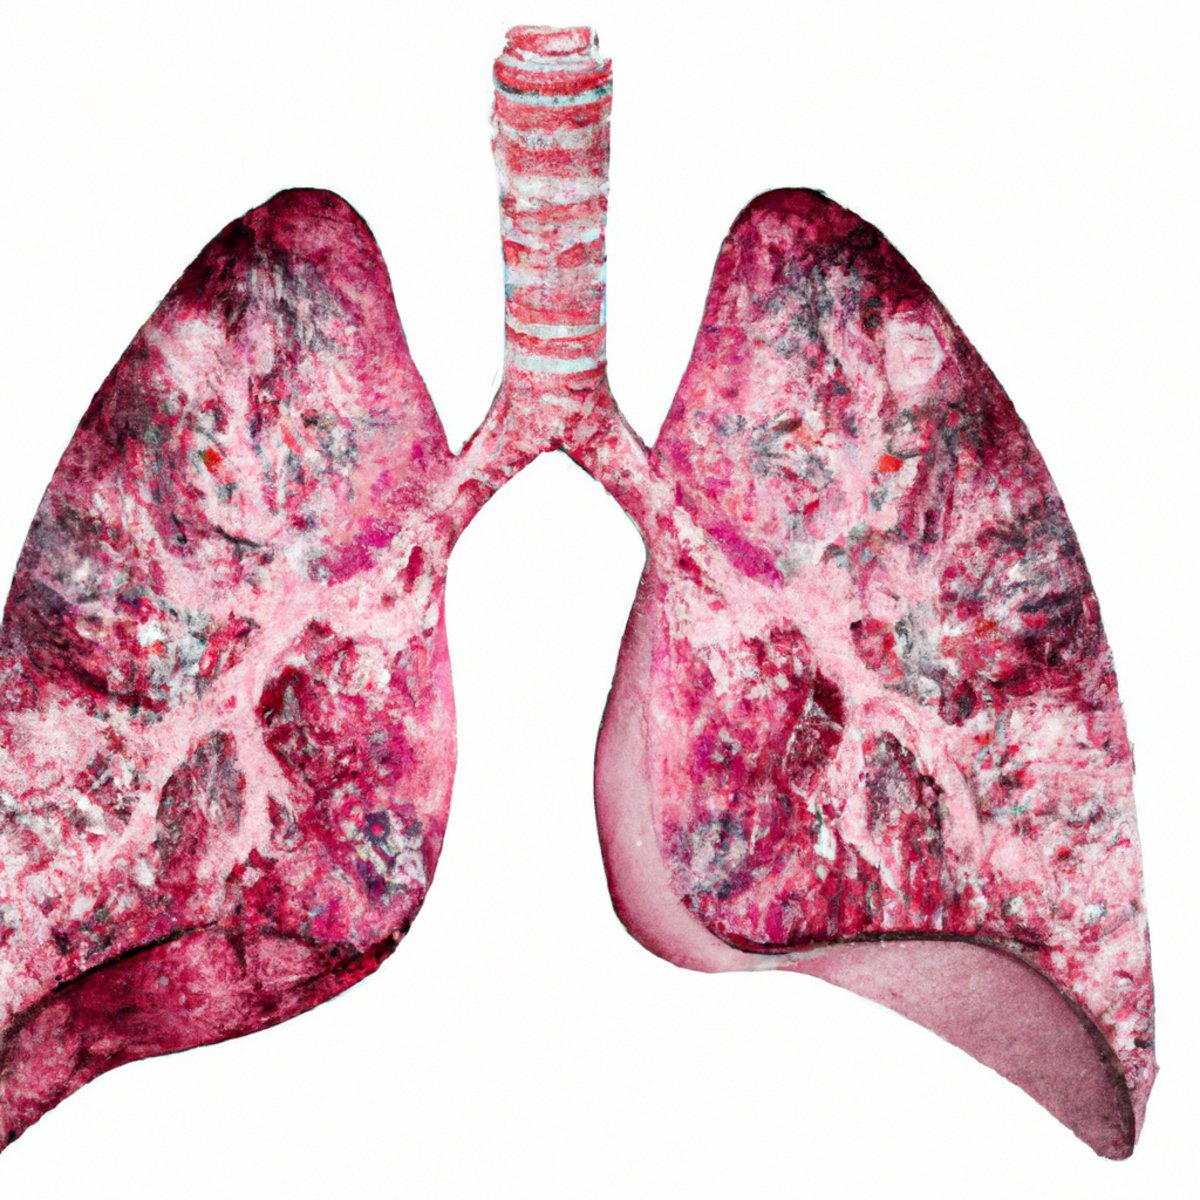 Detailed image of healthy pink lungs with gray granulomas, indicating early signs of sarcoidosis.